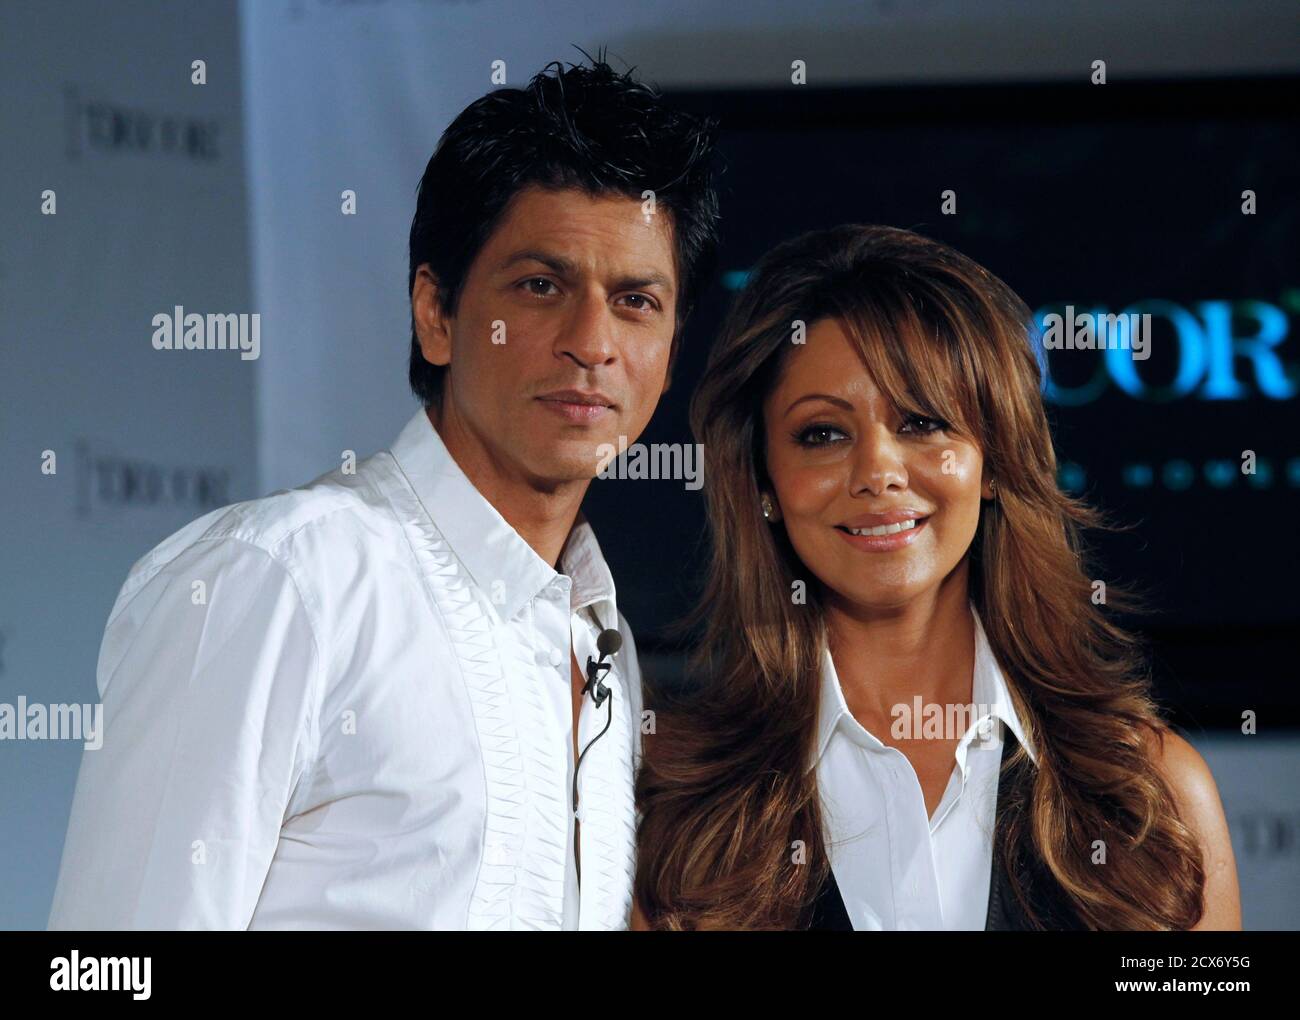 Bollywood actor Shah Rukh Khan (L) and his wife Gauri pose for a picture after a news conference in Mumbai August 26, 2010. One of India's most popular superstars, Khan, 44, is known for guarding his personal life fiercely from the media glare. But for a change he has allowed a bit of the spotlight into his home, appearing in an ad campaign for a furnishing brand with his wife, their first endorsement together. Picture taken August 26, 2010. To match Reuters Life! INDIA-SHAHRUKH/  REUTERS/Danish Siddiqui (INDIA - Tags: ENTERTAINMENT PROFILE) Stock Photo